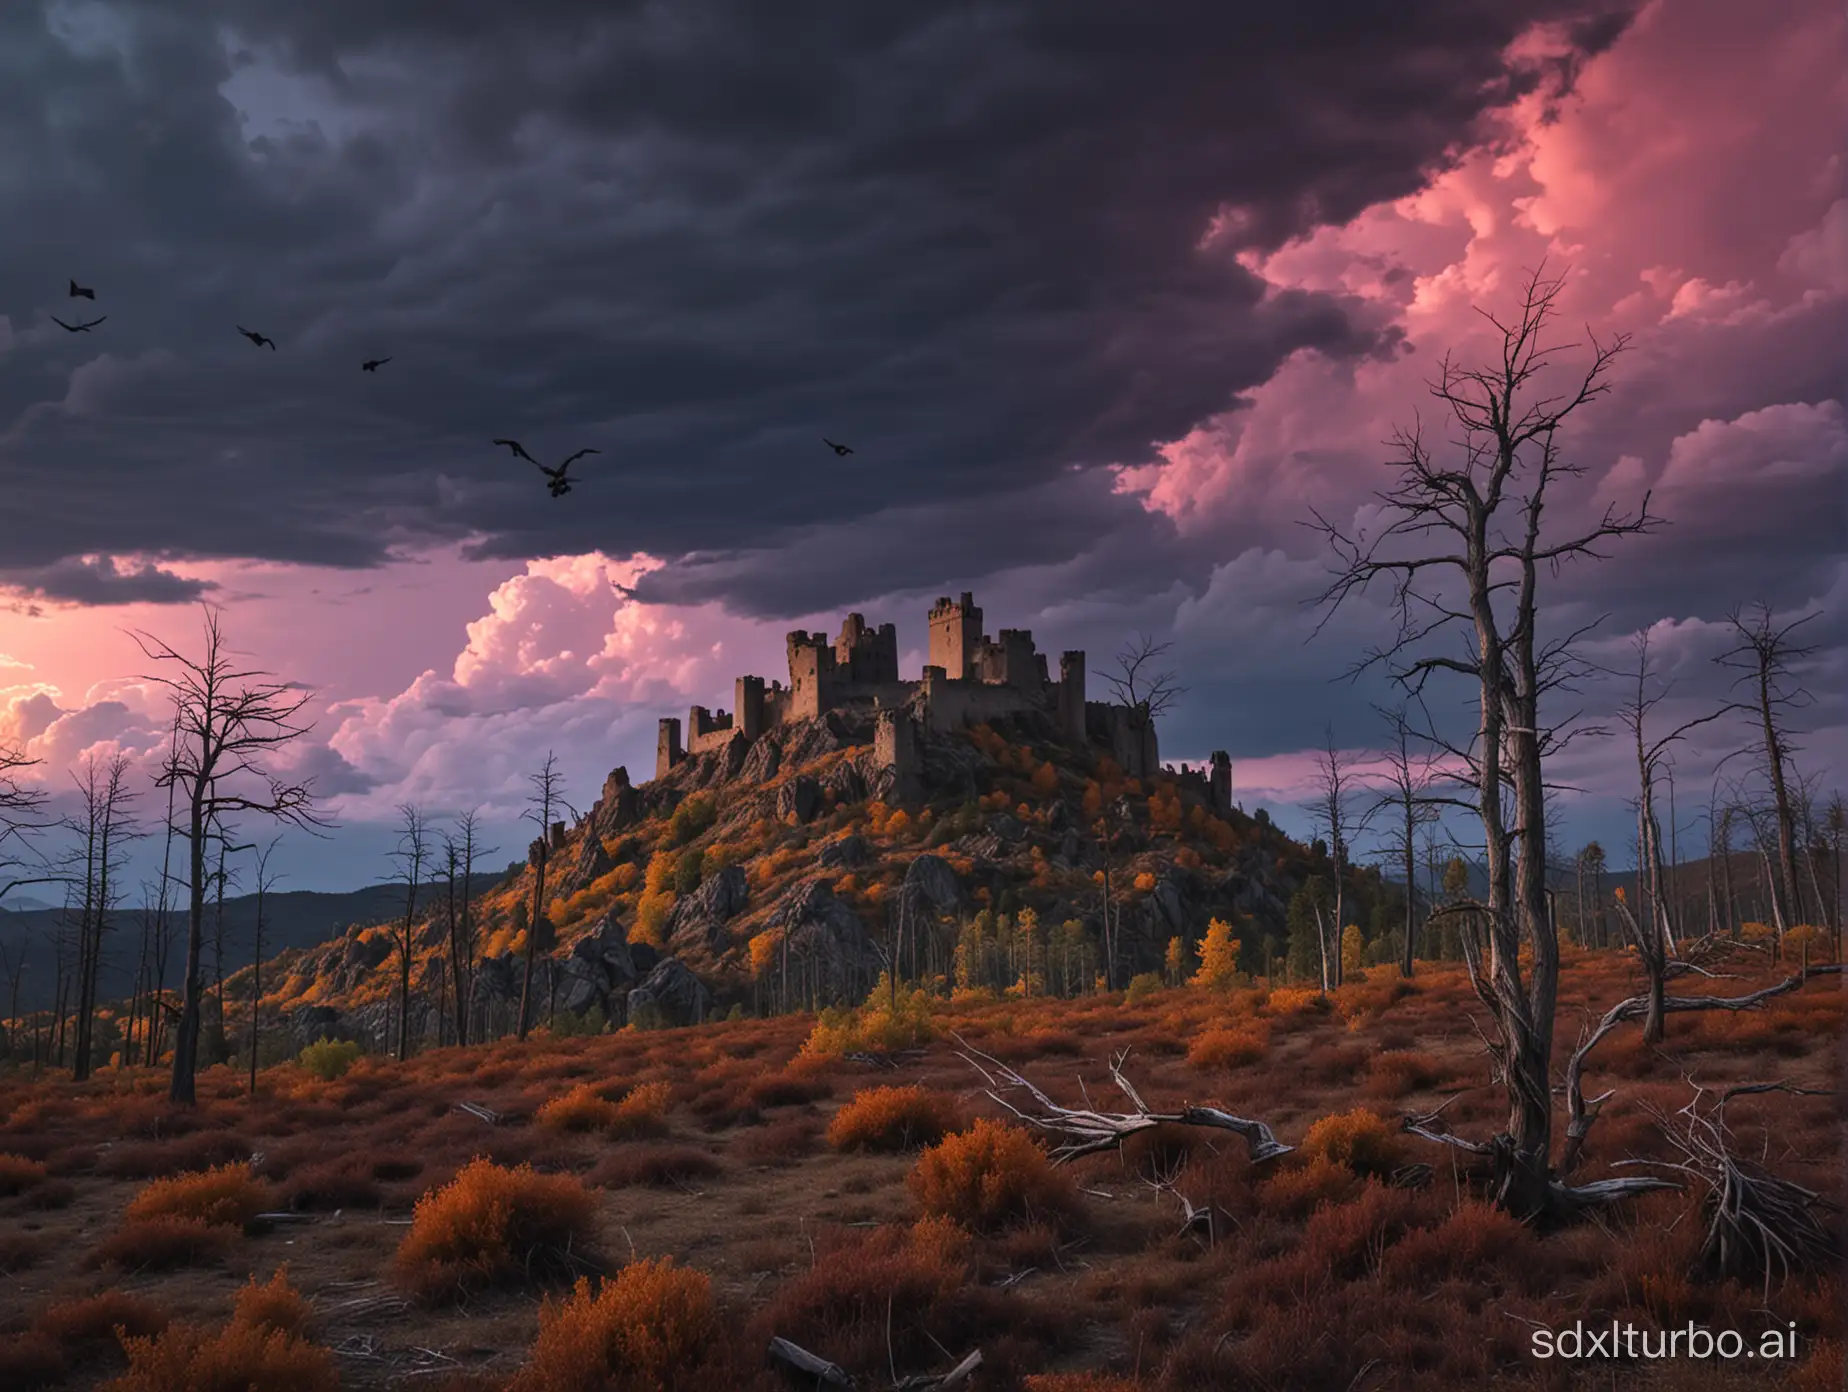 Hill, Castle ruins on the hill, Storm clouds,
[Night], Dark, Colorful sky, lots of eerie colors, high contrast,
Dead Pine forest, Dead Swamp, 
Crows in the air, 
Full shot, Full-length portrait, Wide field of view, Centered, whole mountain visible, camera focused on the castle ruins,
Very Very Beautiful, 8k highly detailed, Soft Light, colorful.